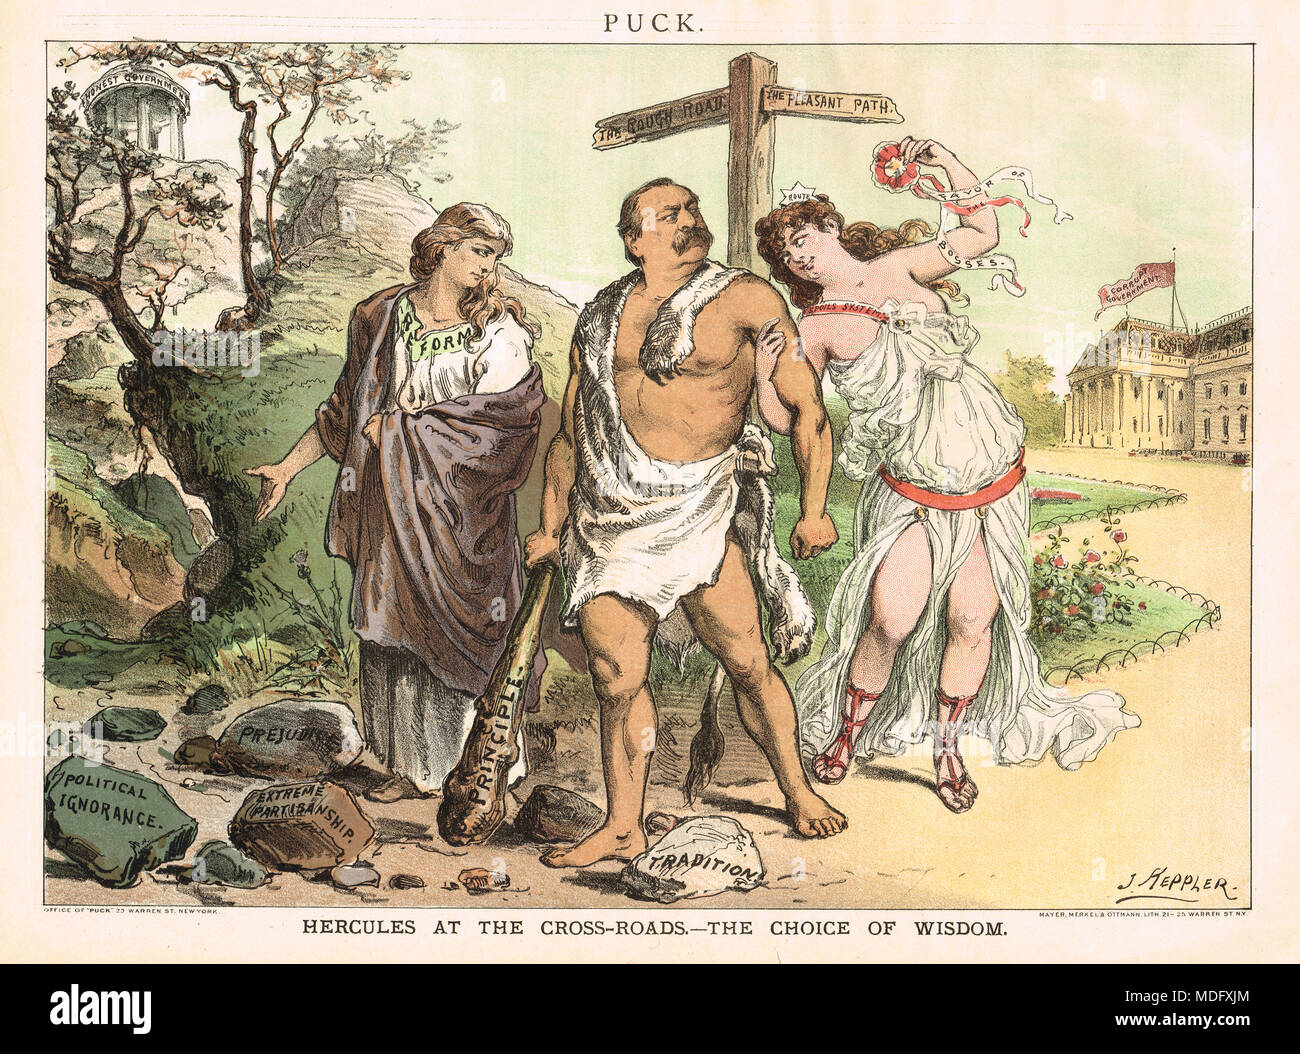 Grover Cleveland as Hercules, Puck, 1885 Stock Photo